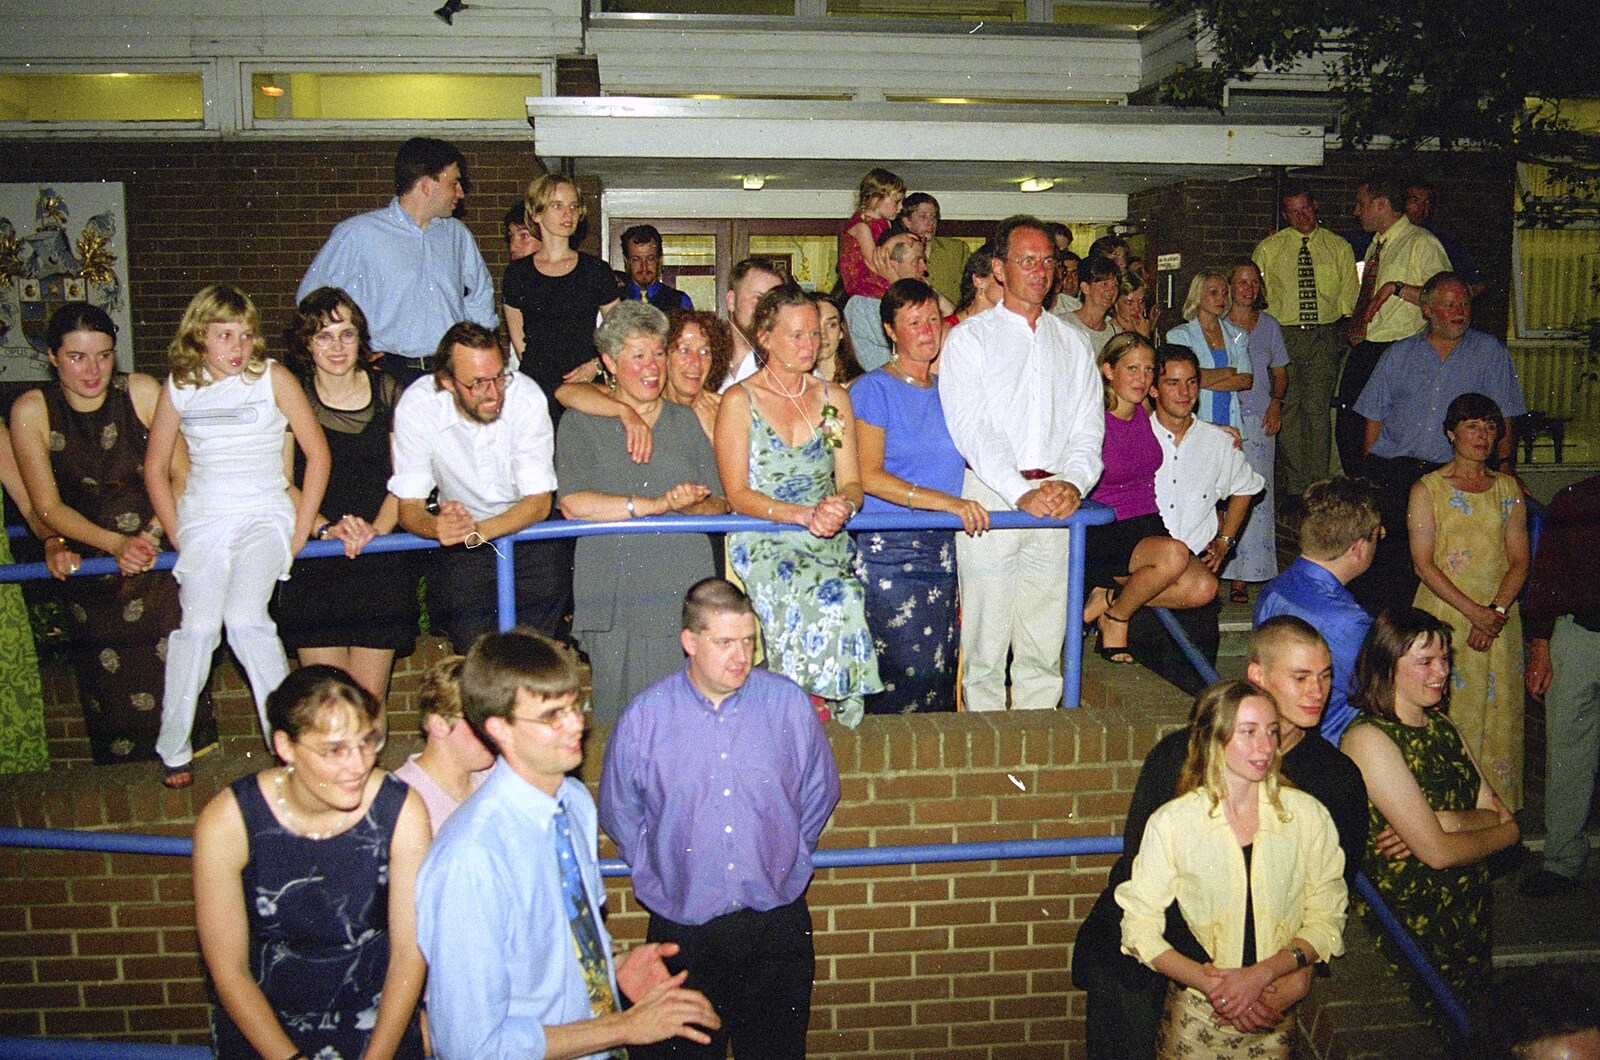 The crowds look on at at Social Club from Joe and Lesley's CISU Wedding, Ipswich, Suffolk - 30th July 1998